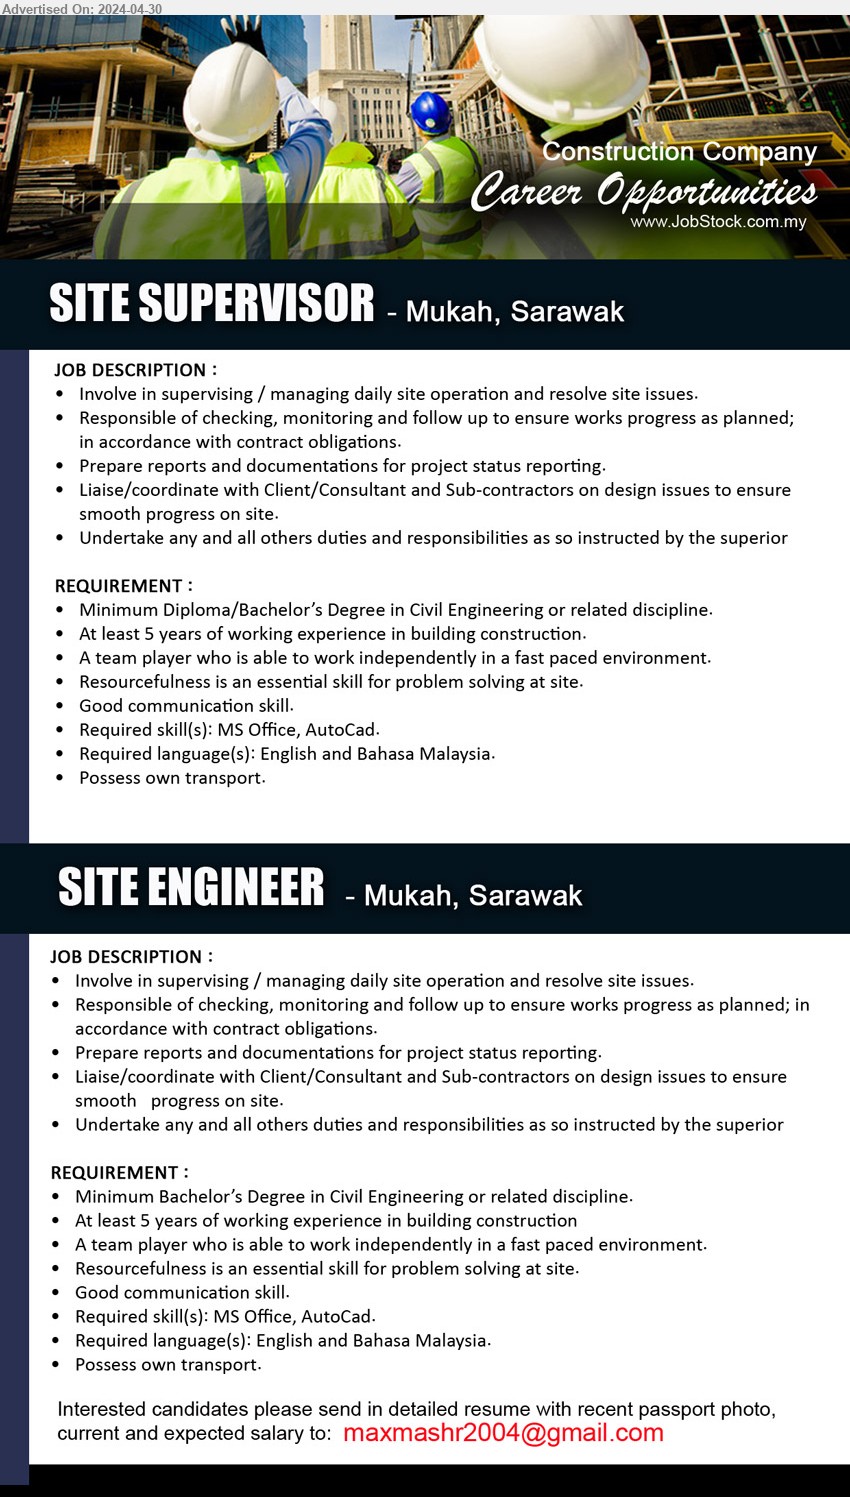 ADVERTISER (Construction Company) - 1. SITE SUPERVISOR (Mukah),  Diploma/Bachelor’s Degree in Civil Engineering or related discipline, At least 5 years of working experience in building construction.,...
2. SITE ENGINEER (Mukah), Bachelor’s Degree in Civil Engineering or related discipline, At least 5 years of working experience in building construction,...
Email resume to ...